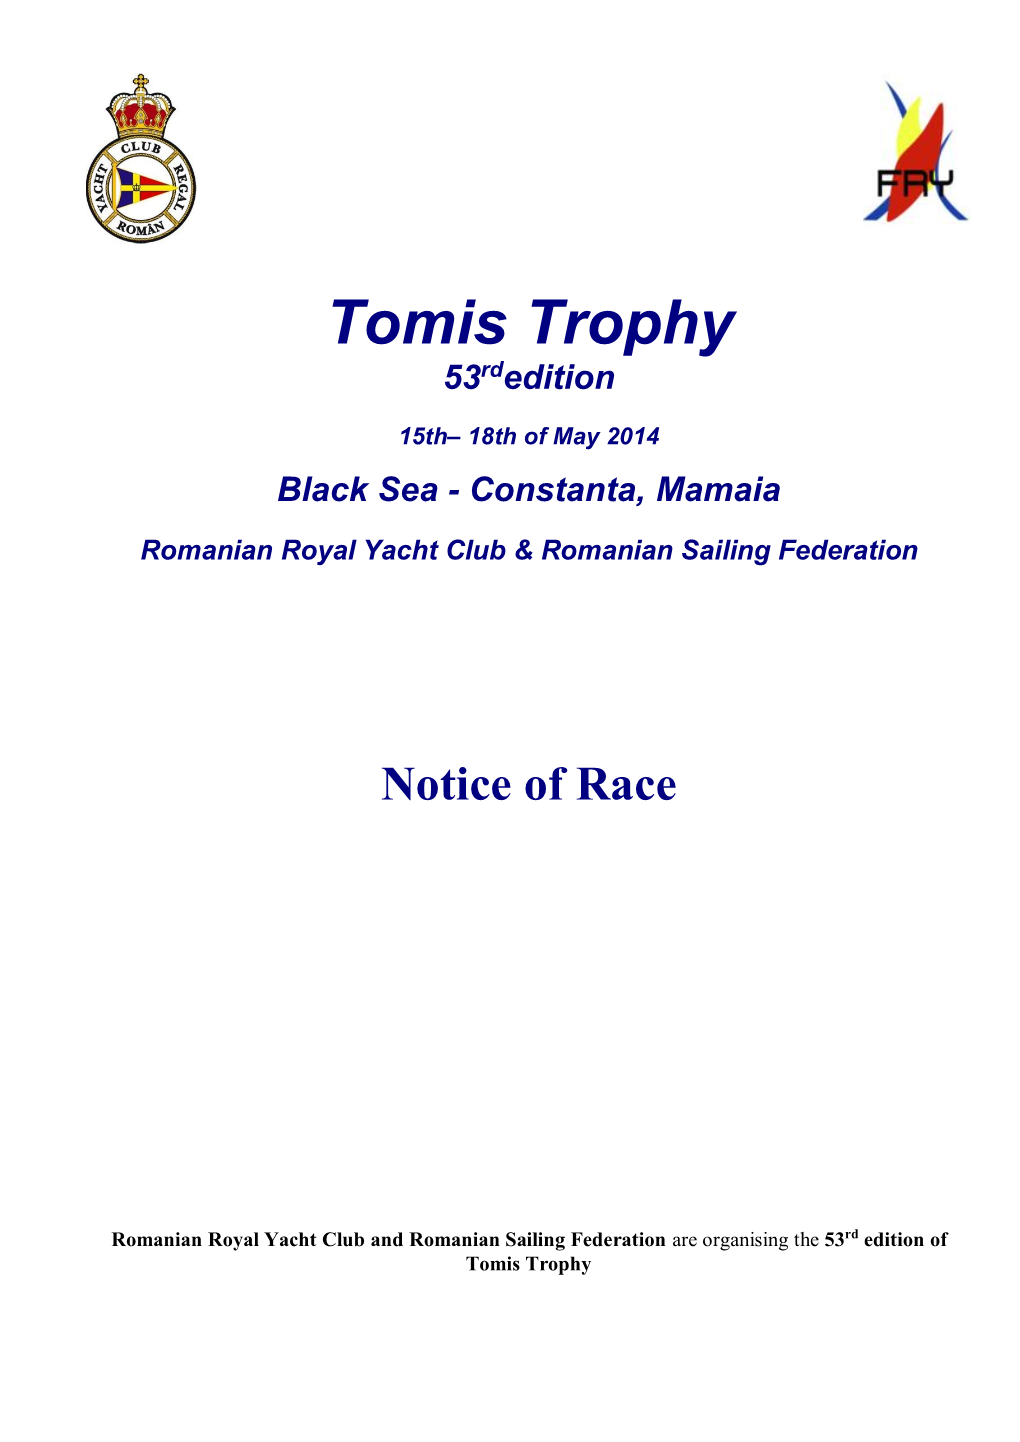 Tomis Trophy 53Rdedition